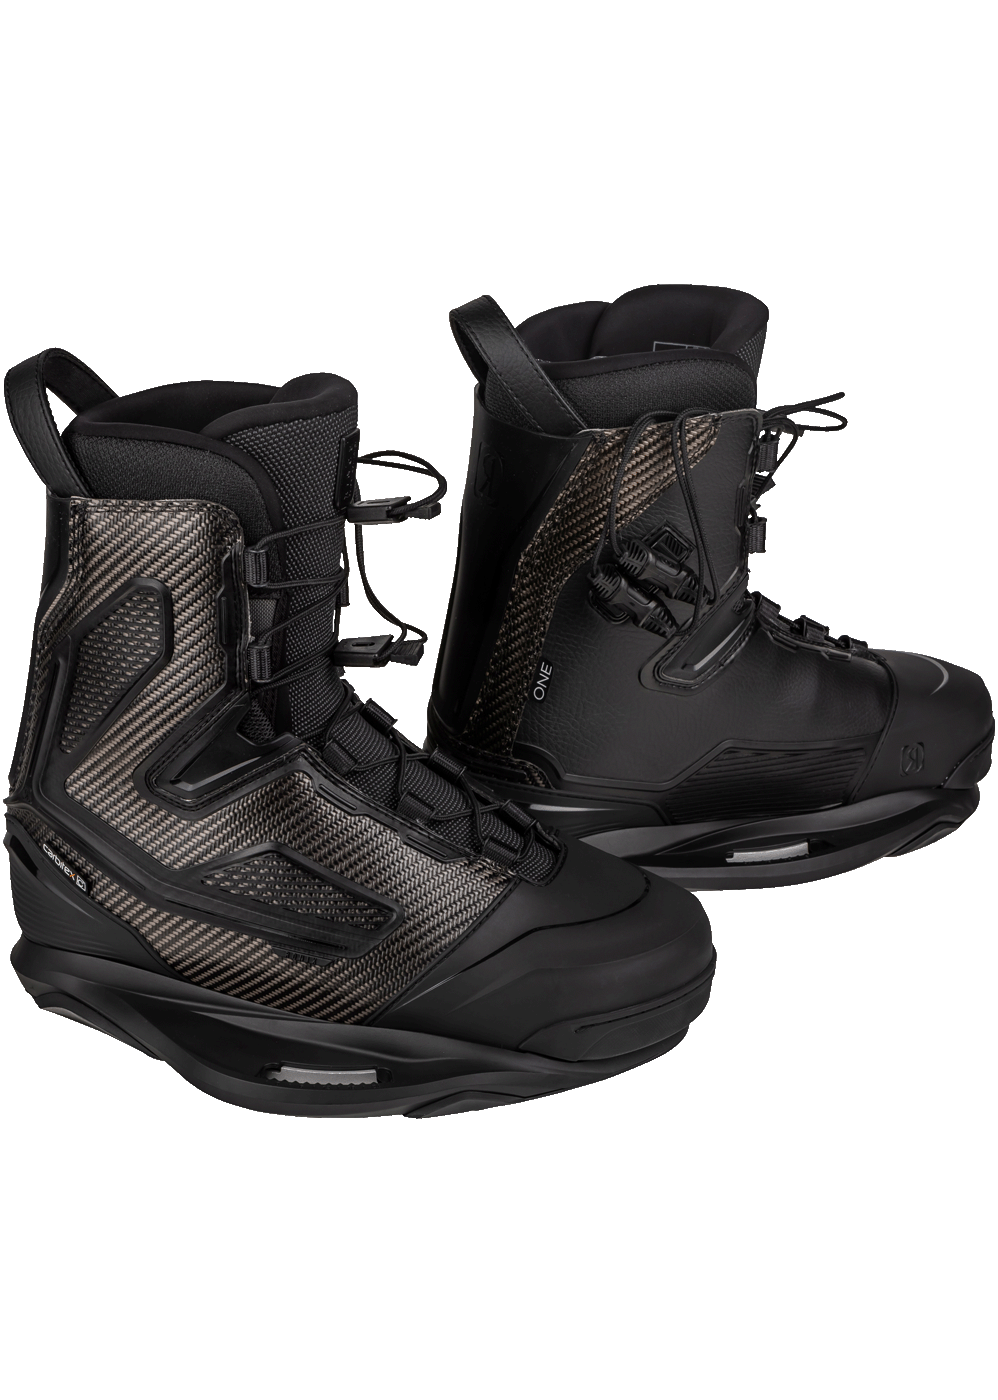 Ronix One Carbitex Wakeboard Boots | 2022 | Sale!